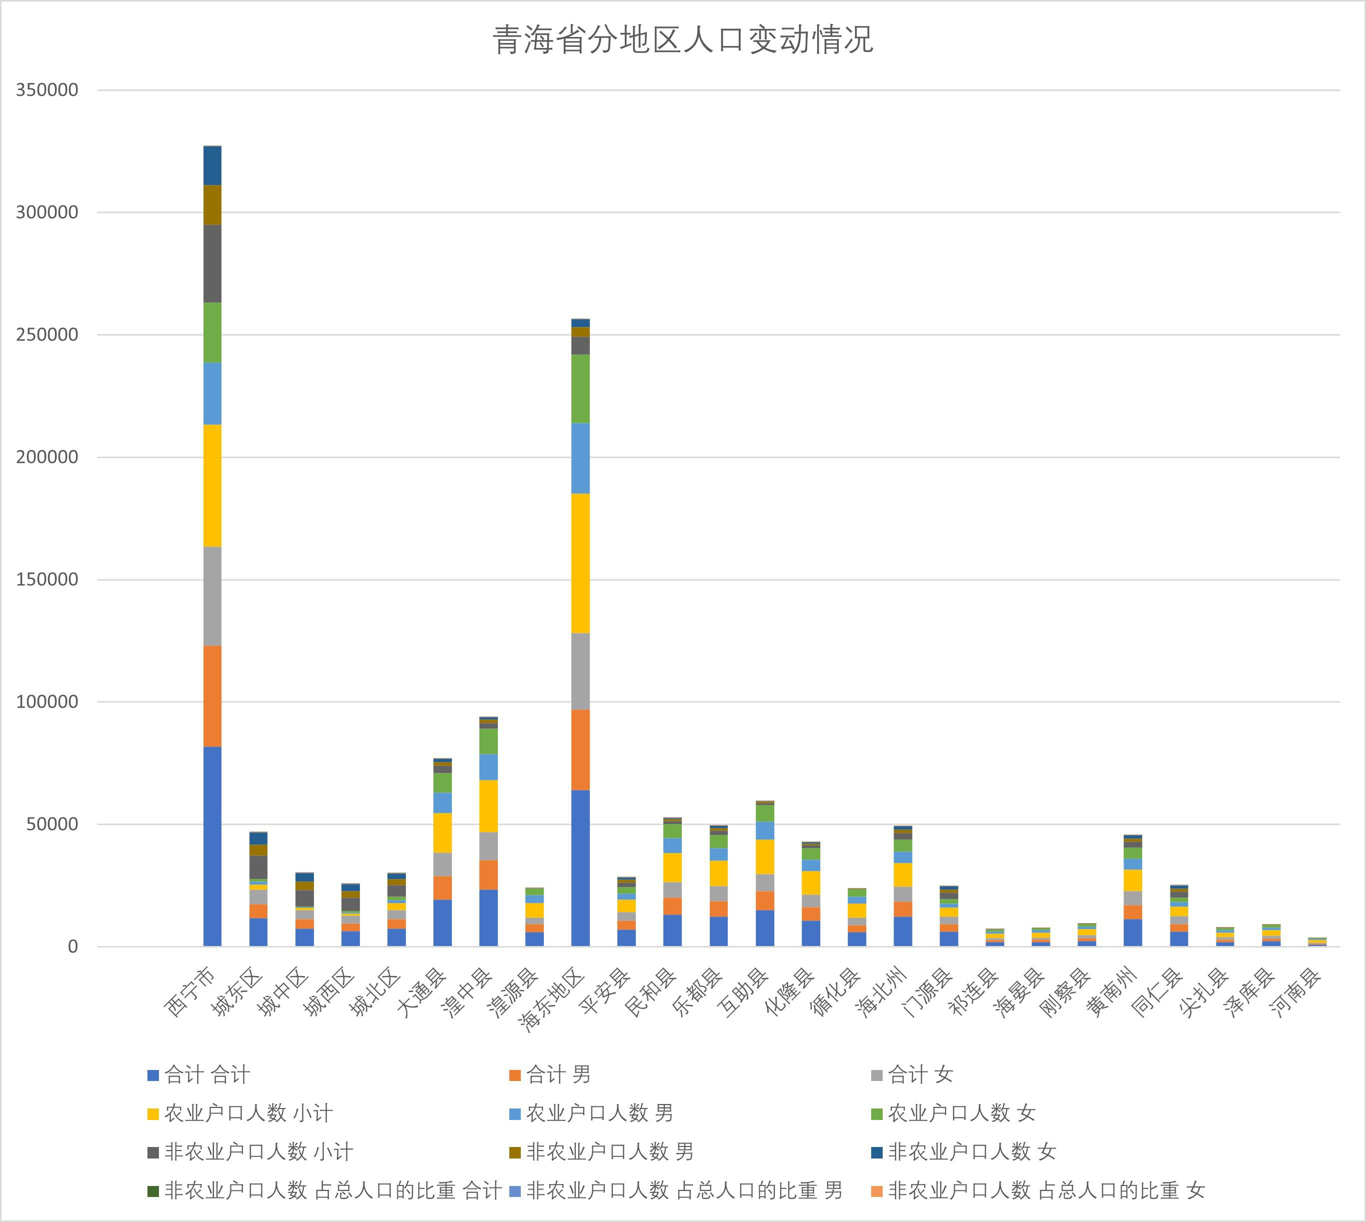 Population changes in different regions of Qinghai Province (1998-2010)